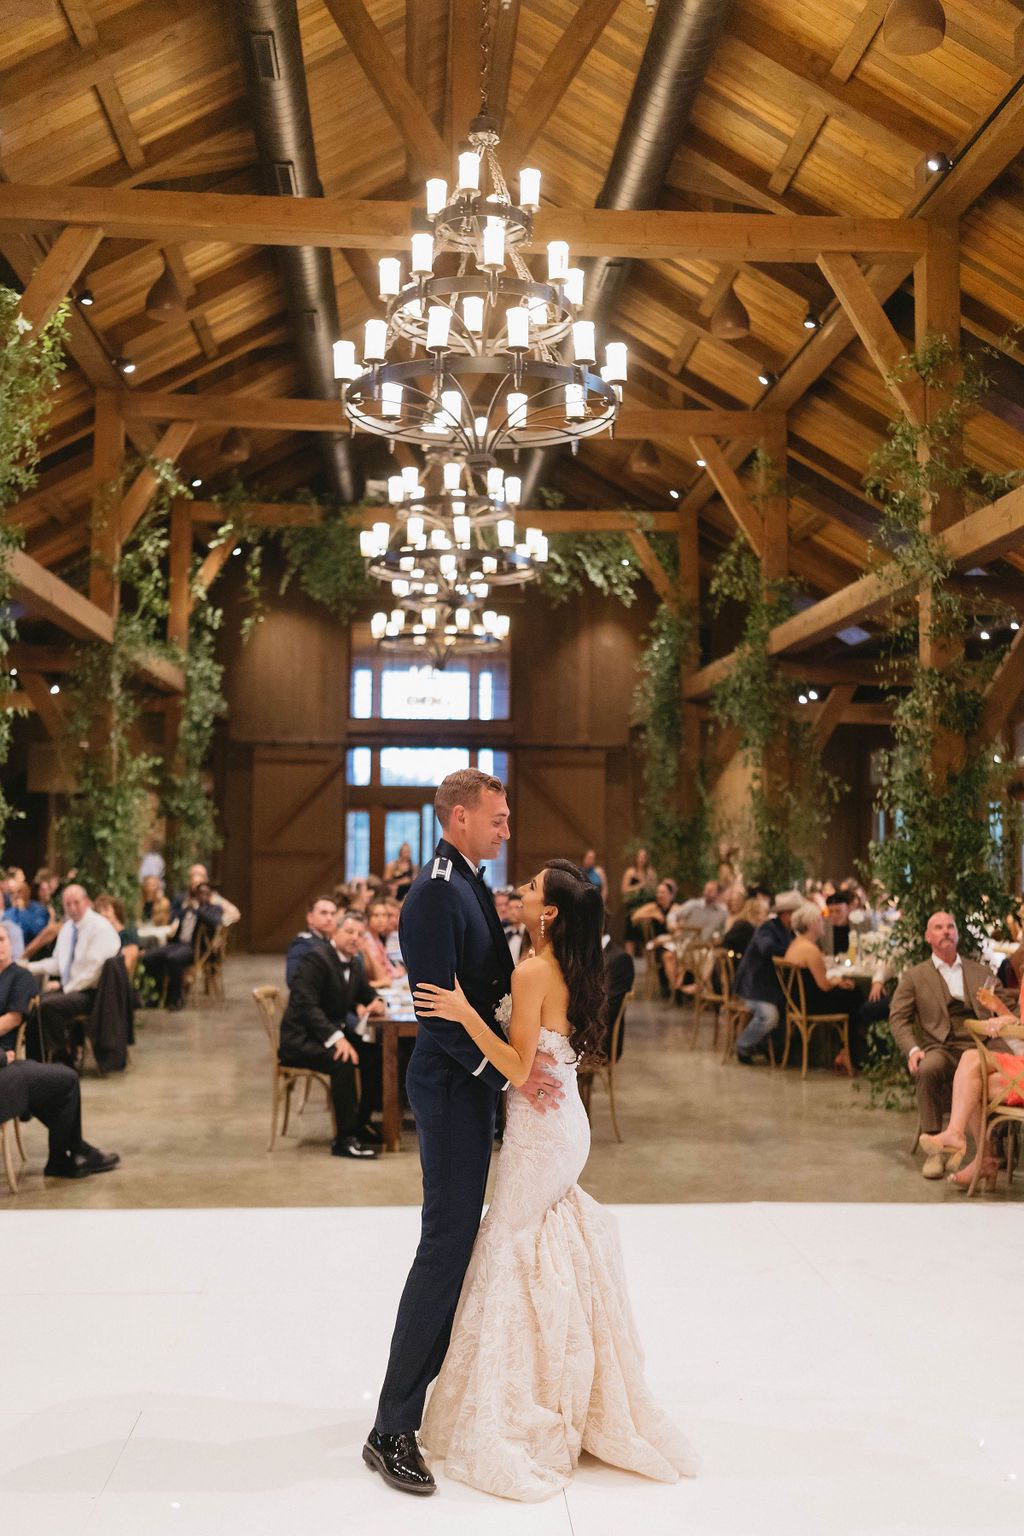 Bride and air force groom sharing their first dance on a white dance floor